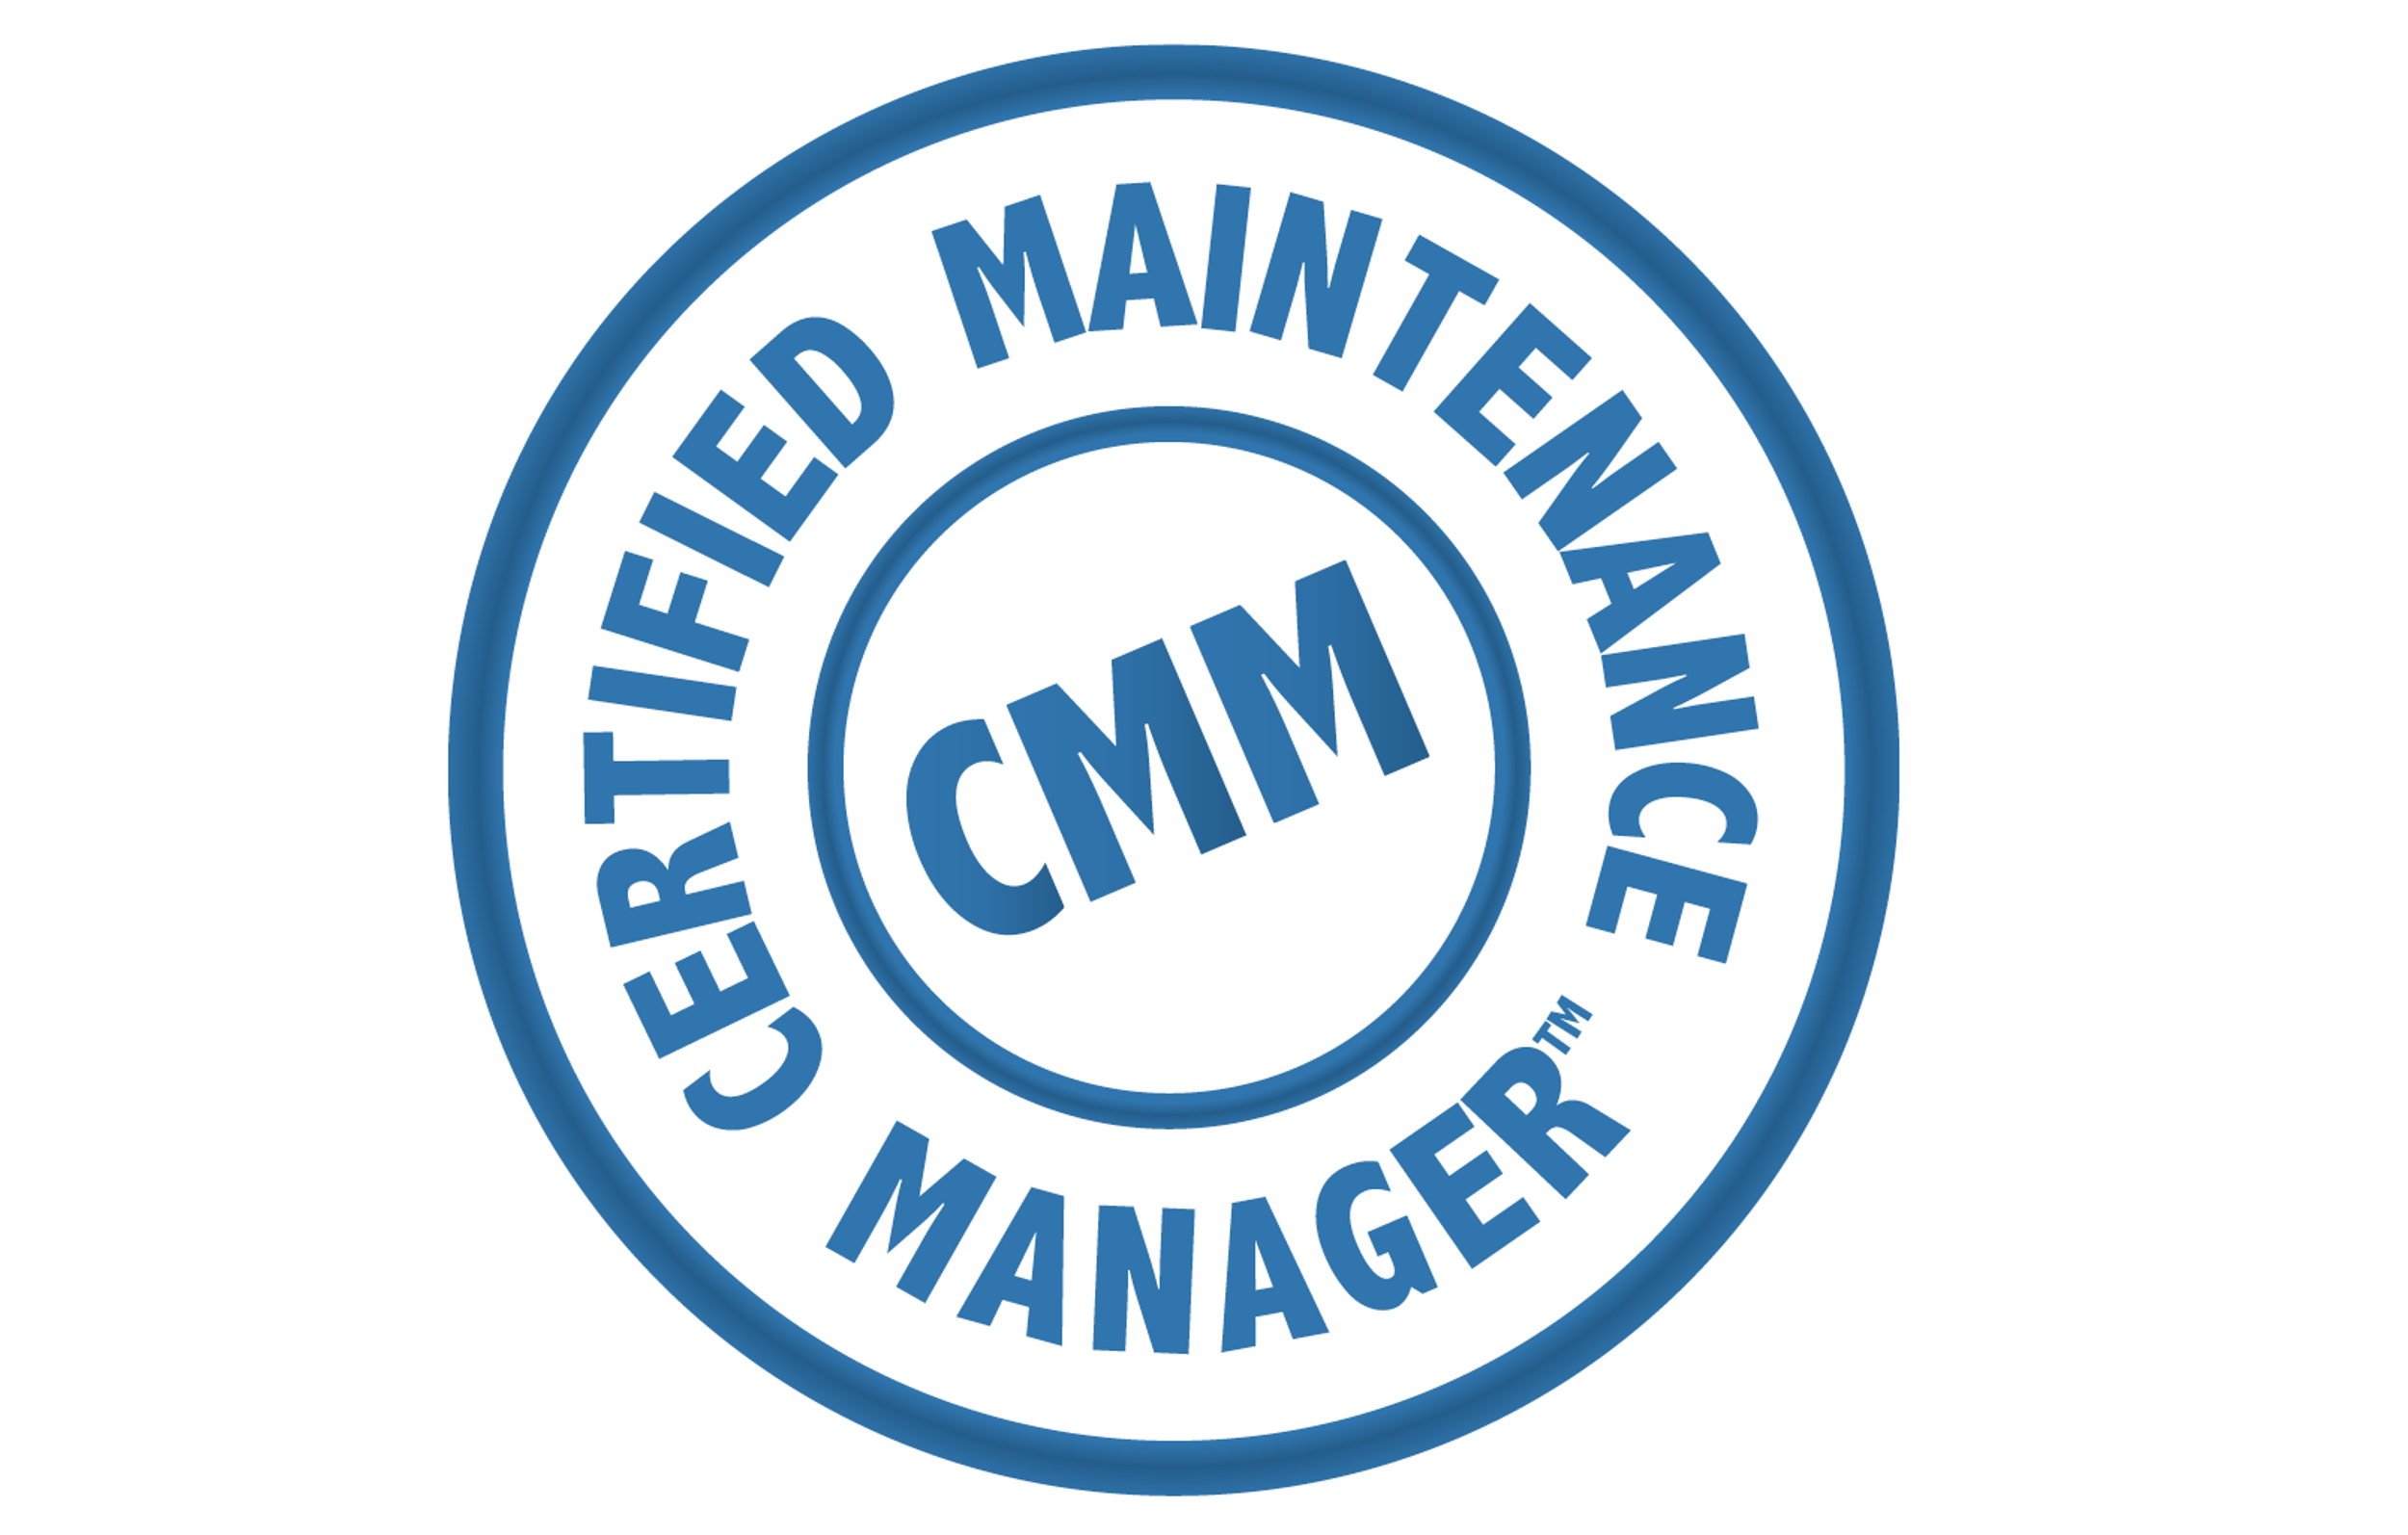 June 2022 Certified Maintenance Manager Workshop by Reliabilityweb.com